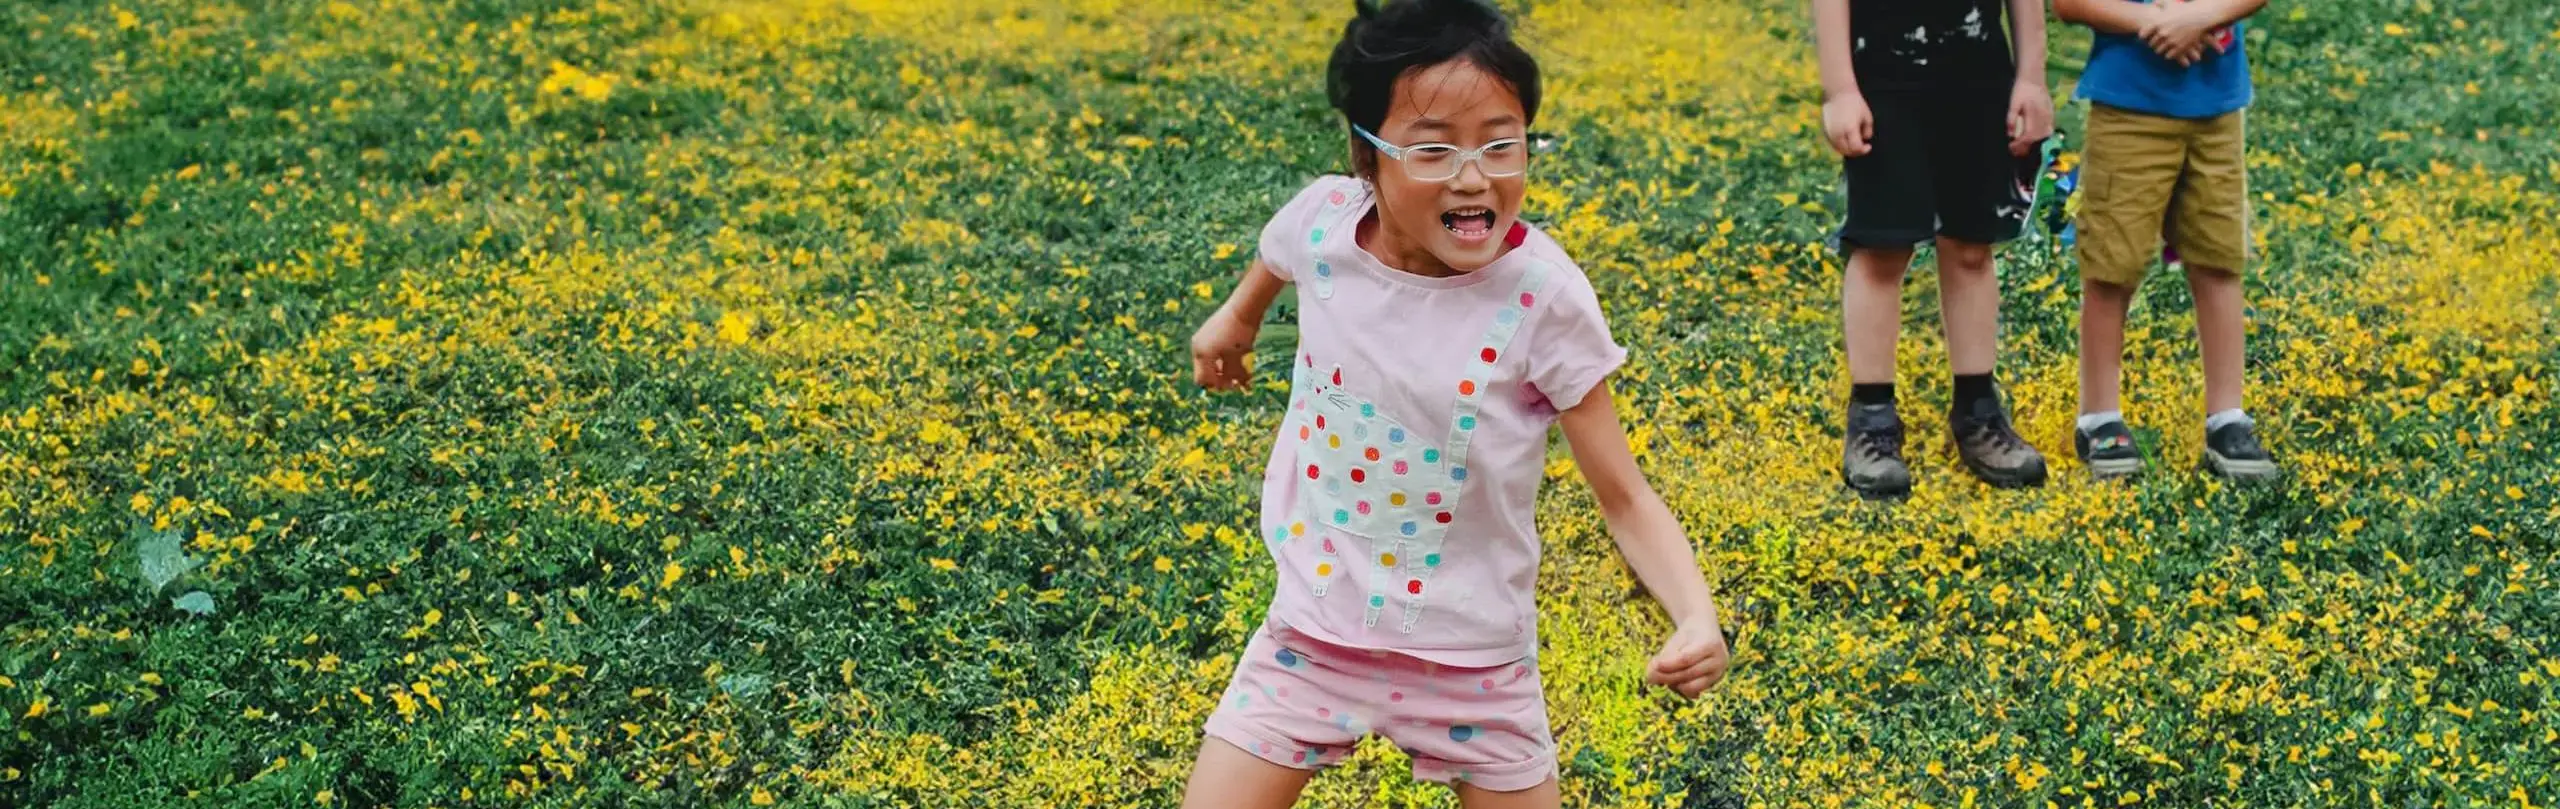 A joyful girl with glasses runs through a field of yellow flowers, her excitement palpable. In the background, two boys stand watching, one with a smile, against the vibrant green and yellow backdrop.